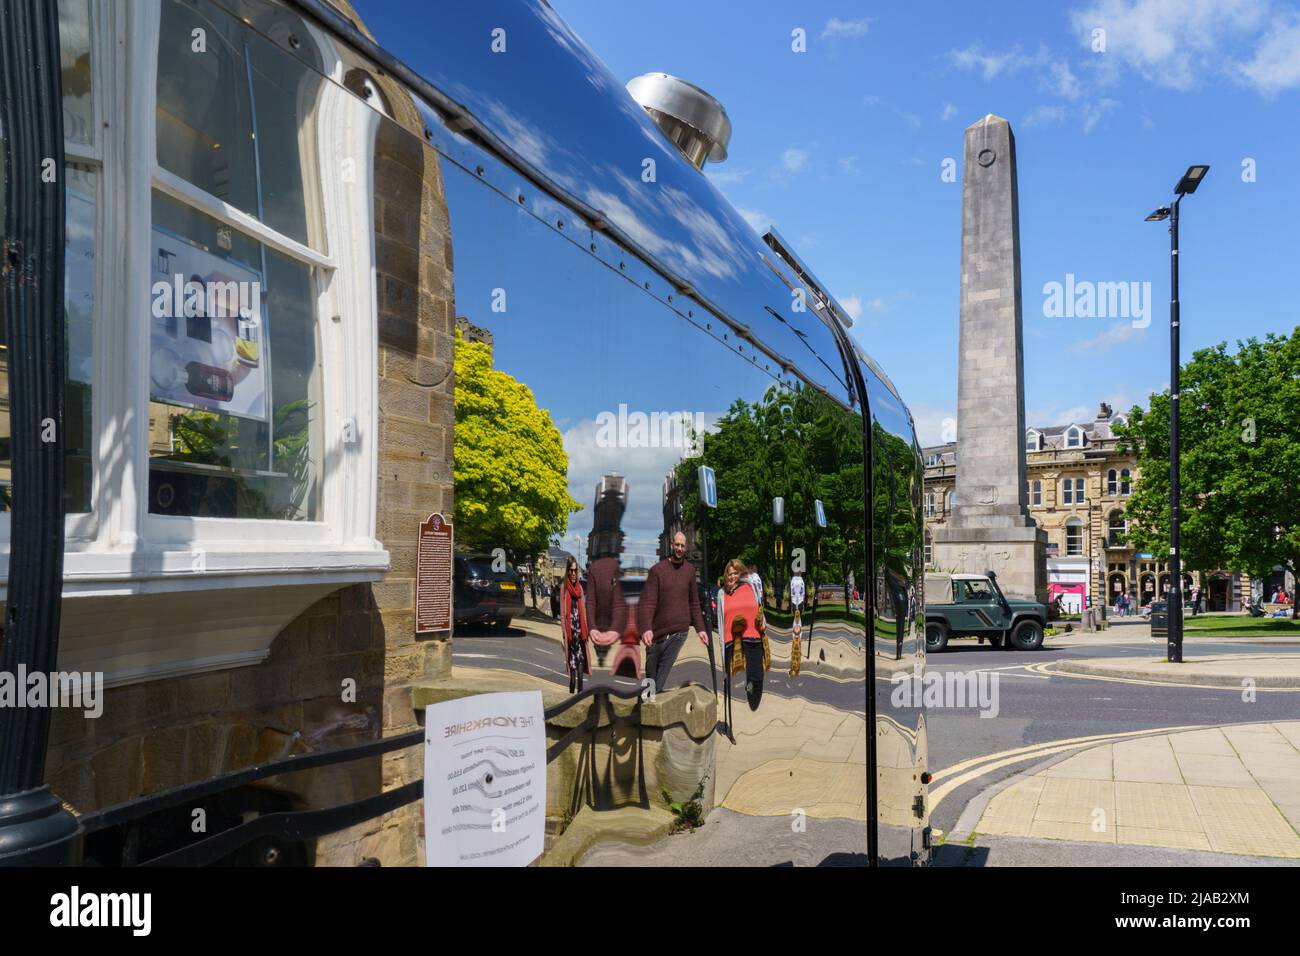 The Cenotaph War Memorial distorted reflection seen on the side of a shiny Airstream food truck stationary in Harrogate, North Yorkshire, England, UK. Stock Photo